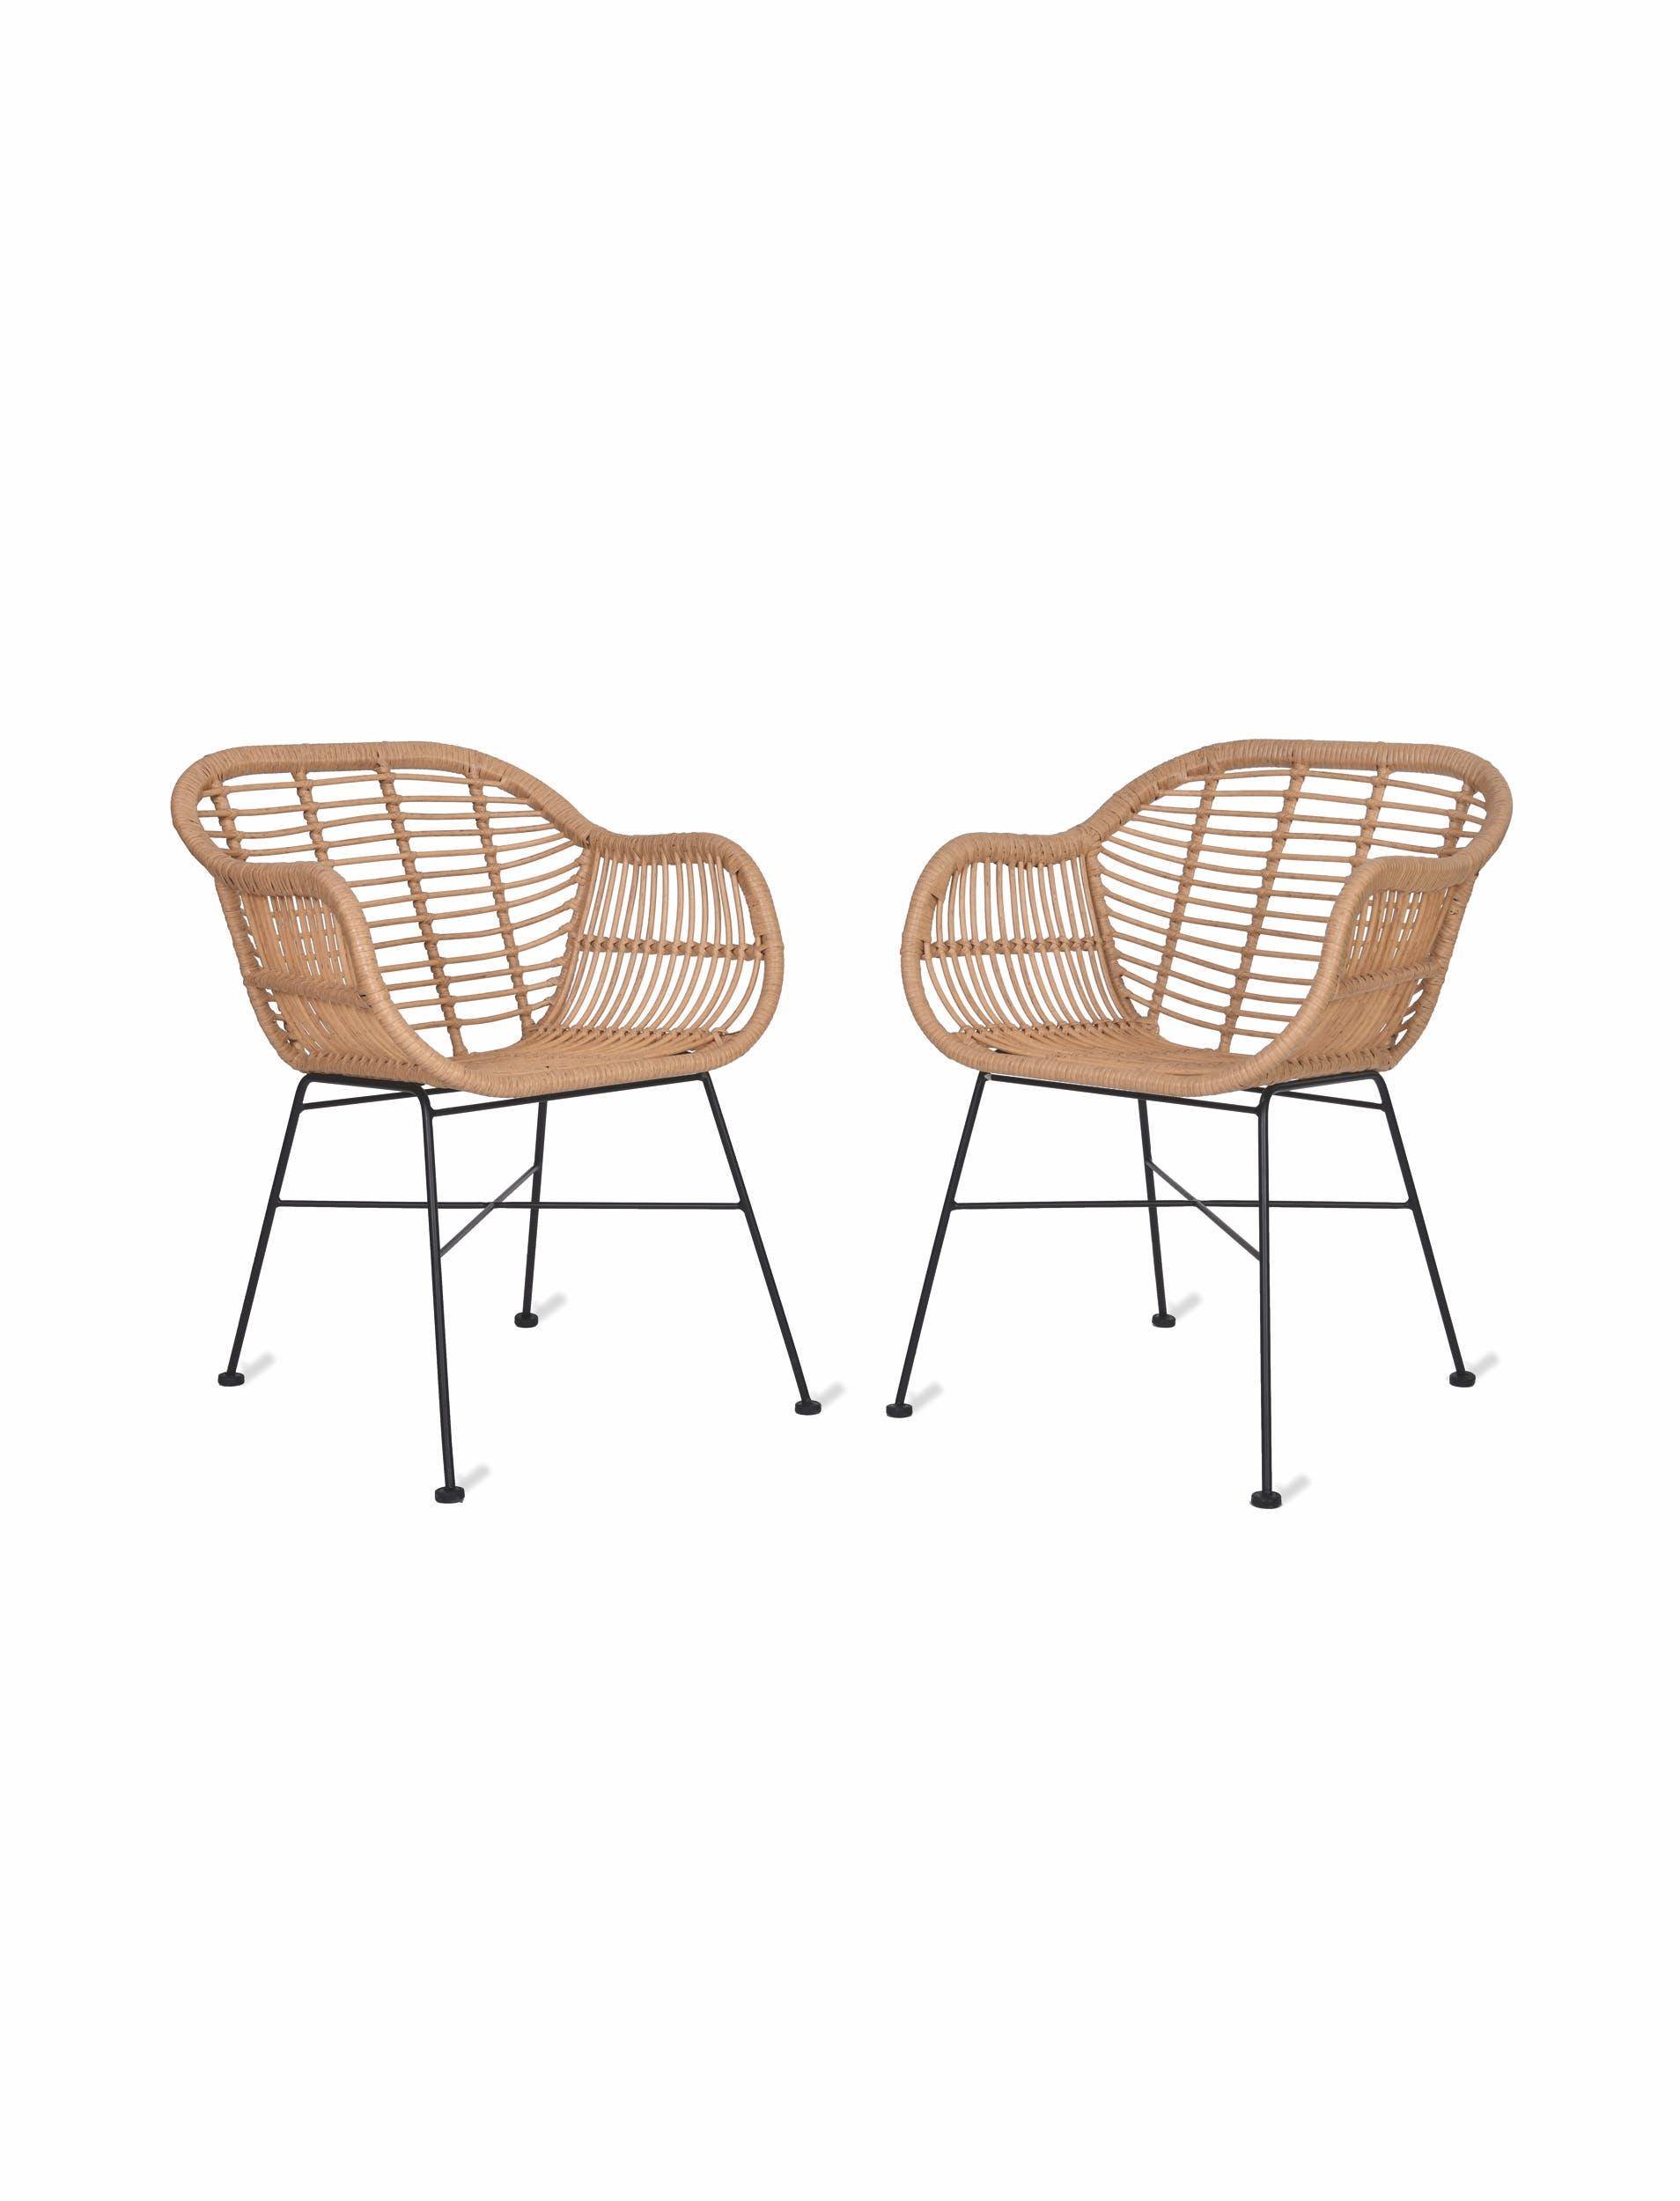 pair of rattan bamboo weave all weather garden dining chairs for indoor and outdoor use